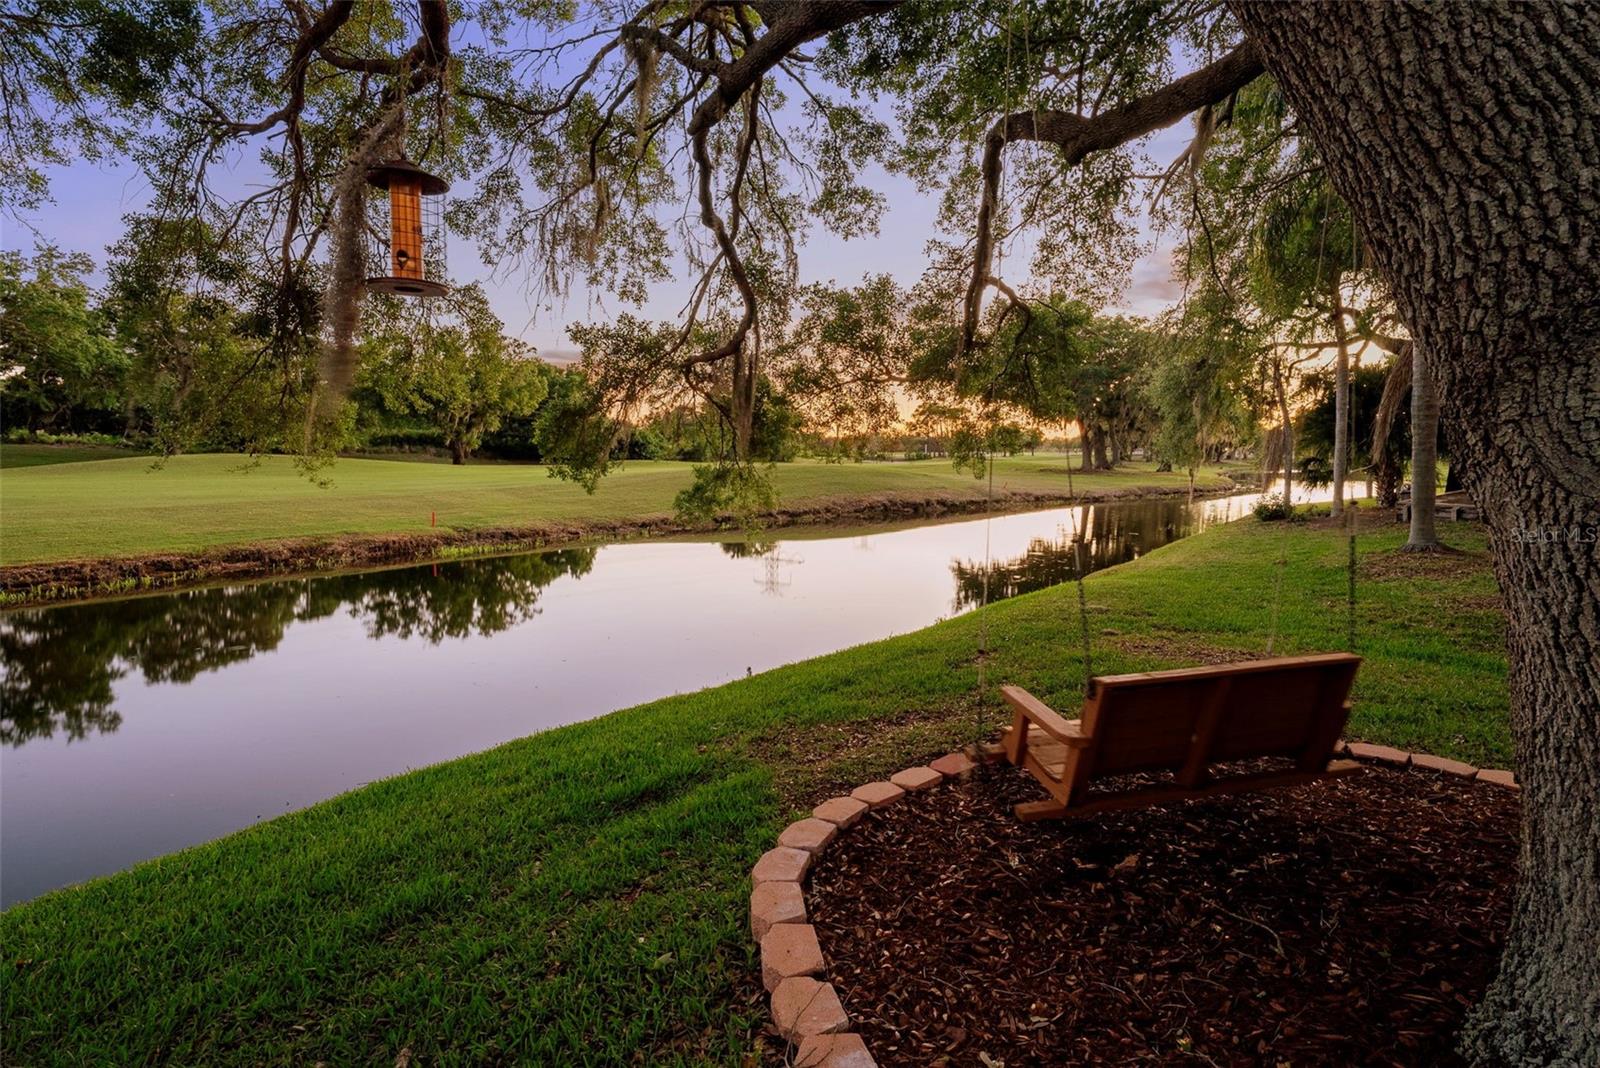 View of the pond and swing as the sun sets